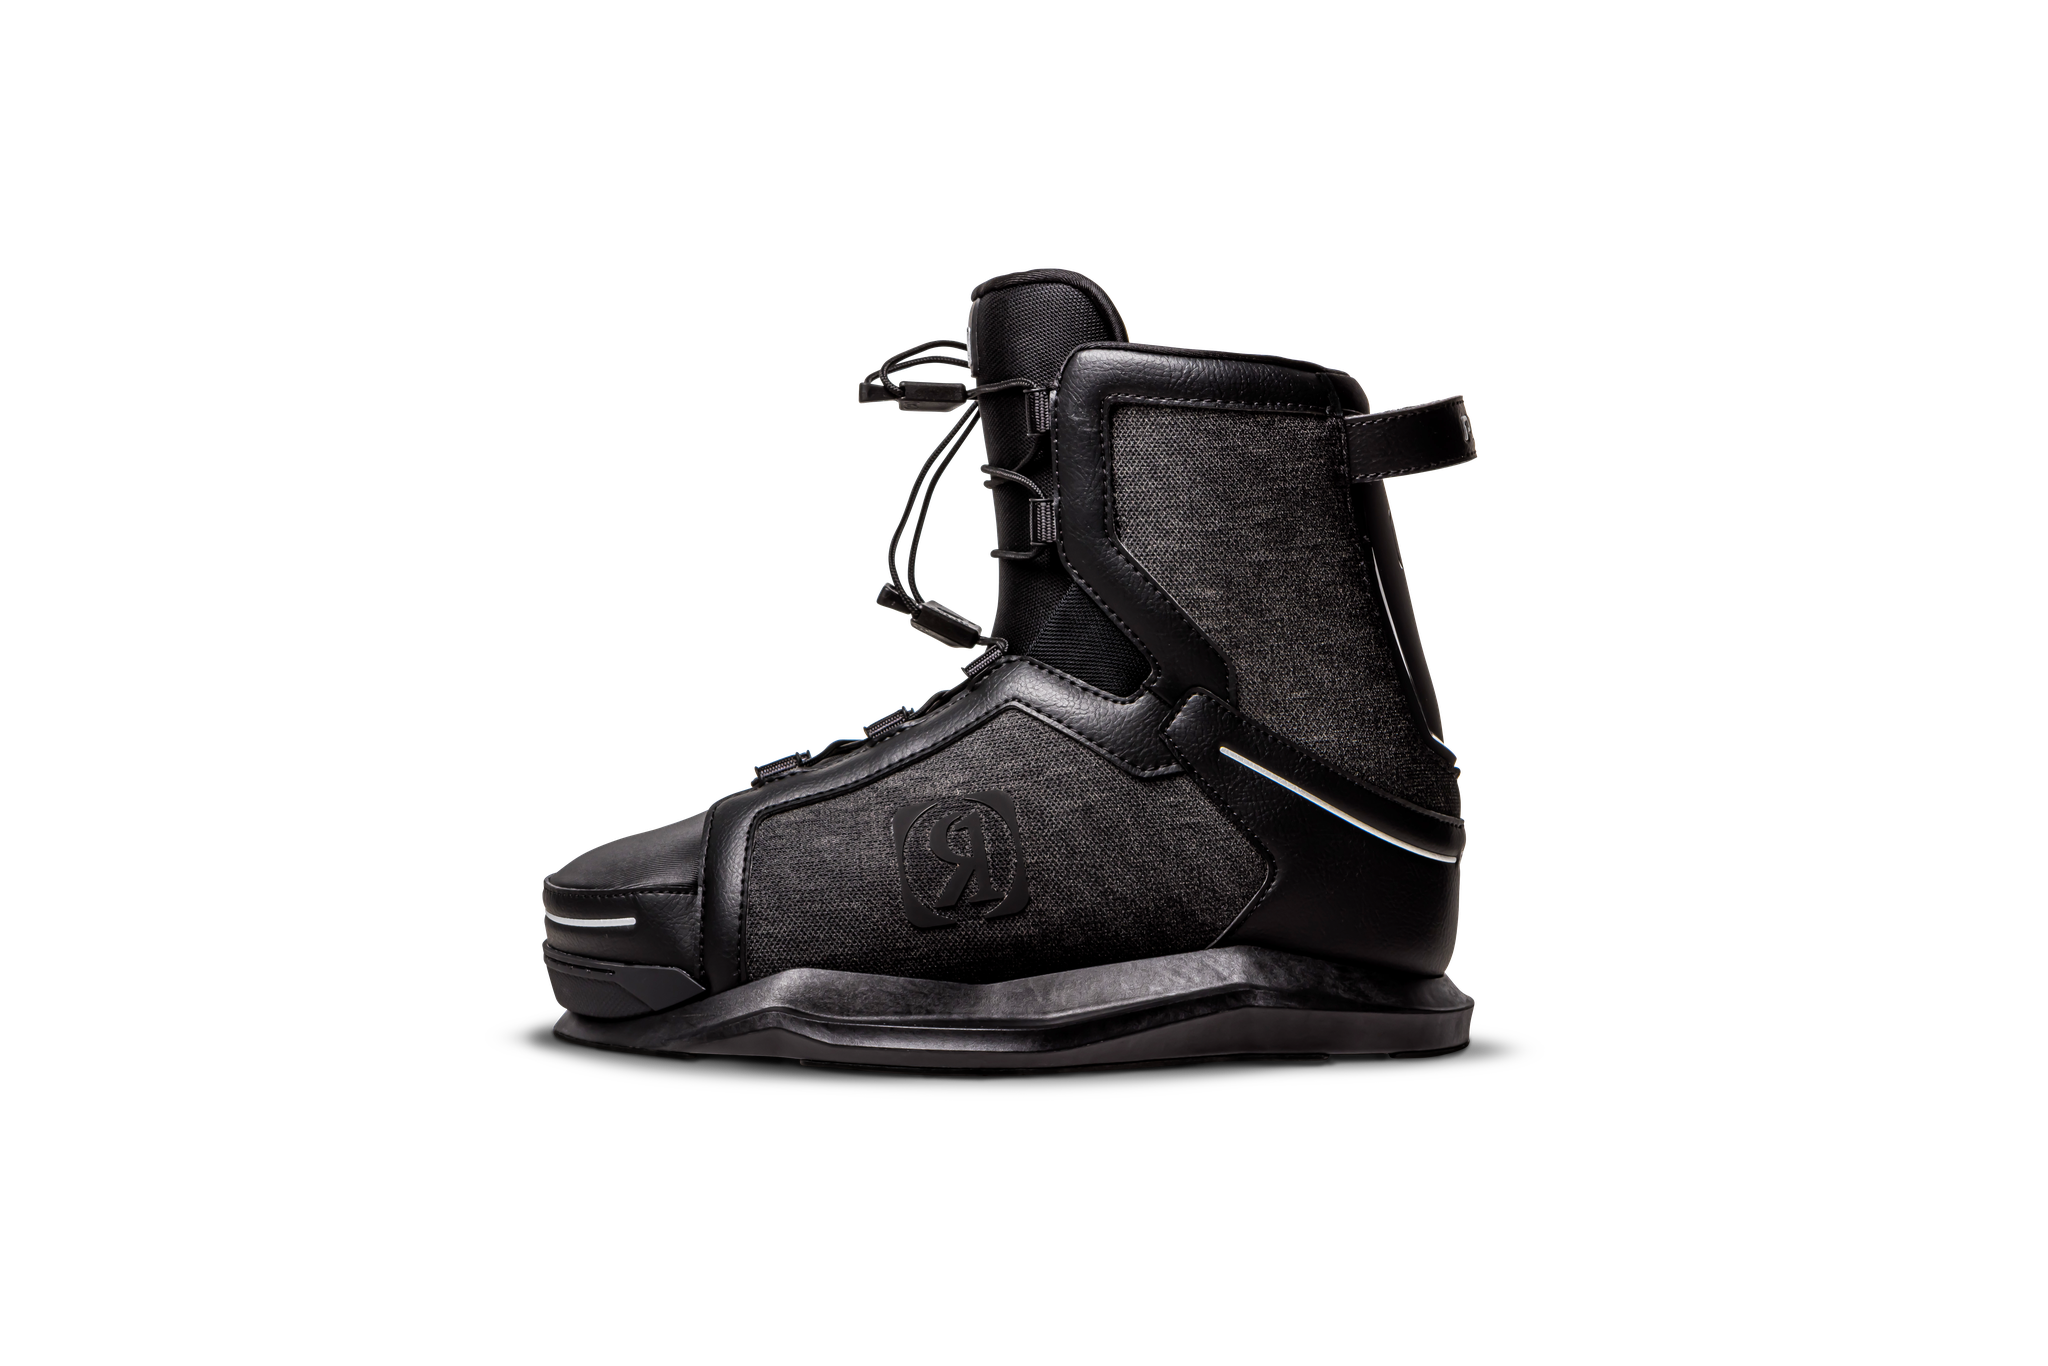 A pair of Ronix 2024 Parks Boots featuring Autolock technology on a black background.